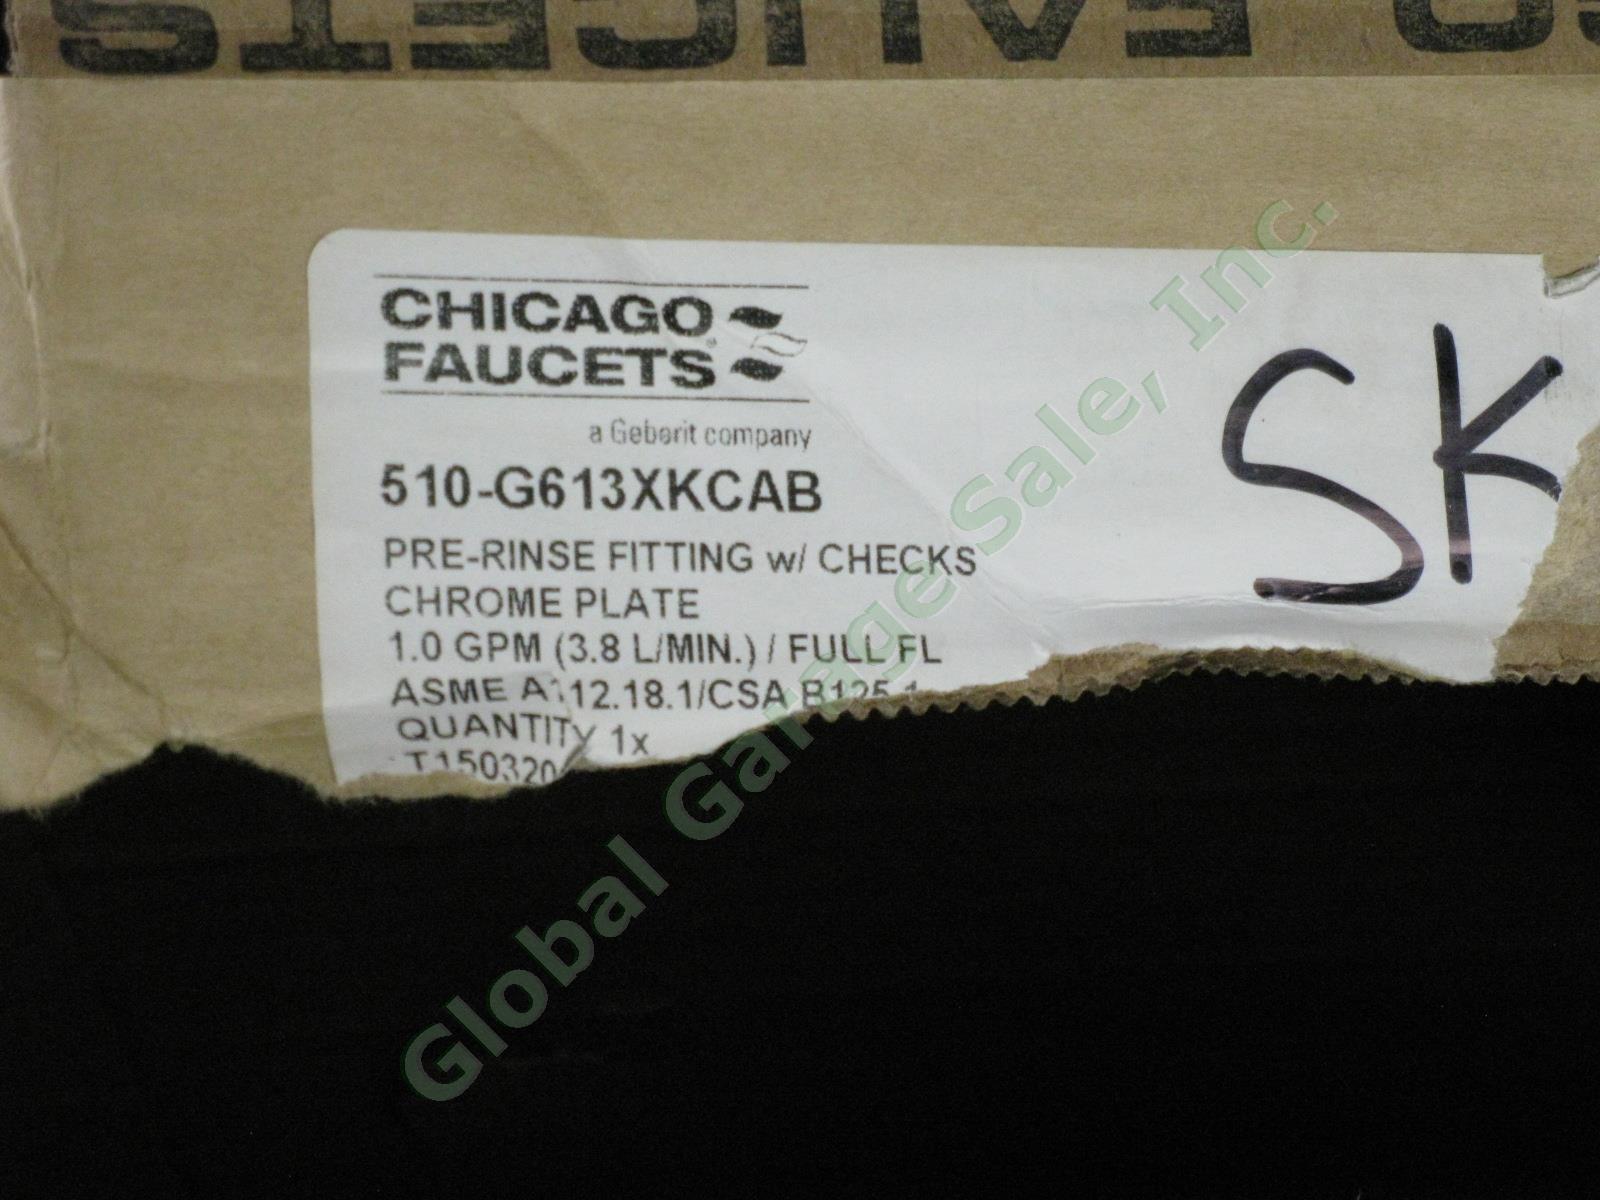 Chicago Faucets 510-G613XKCAB Pre Rinse Fitting Check Chrome Plate 60 PSI Valve 9